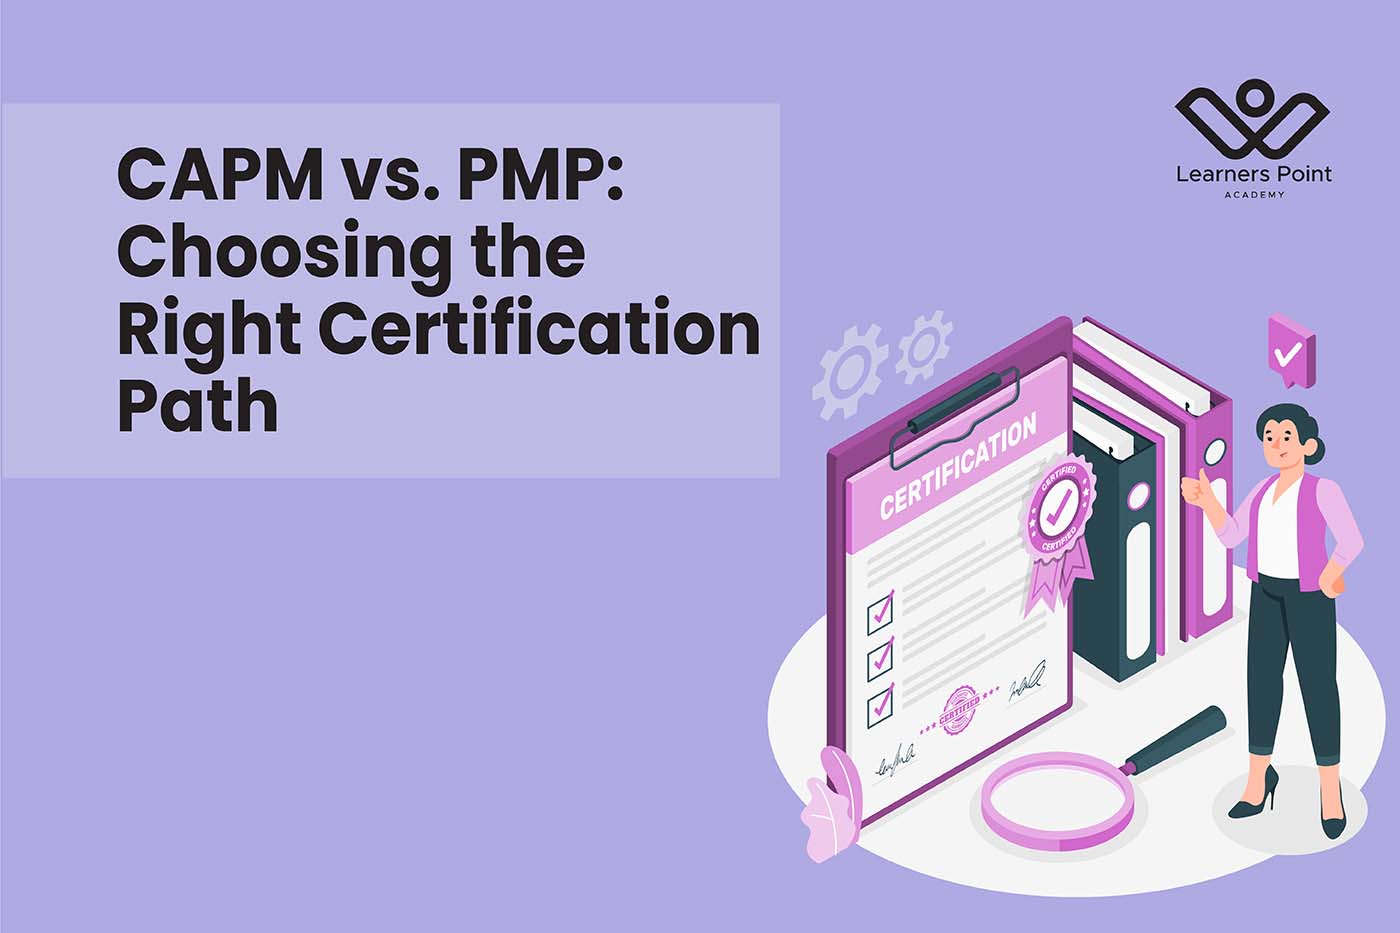 CAPM vs. PMP: Choosing the Right Certification Path